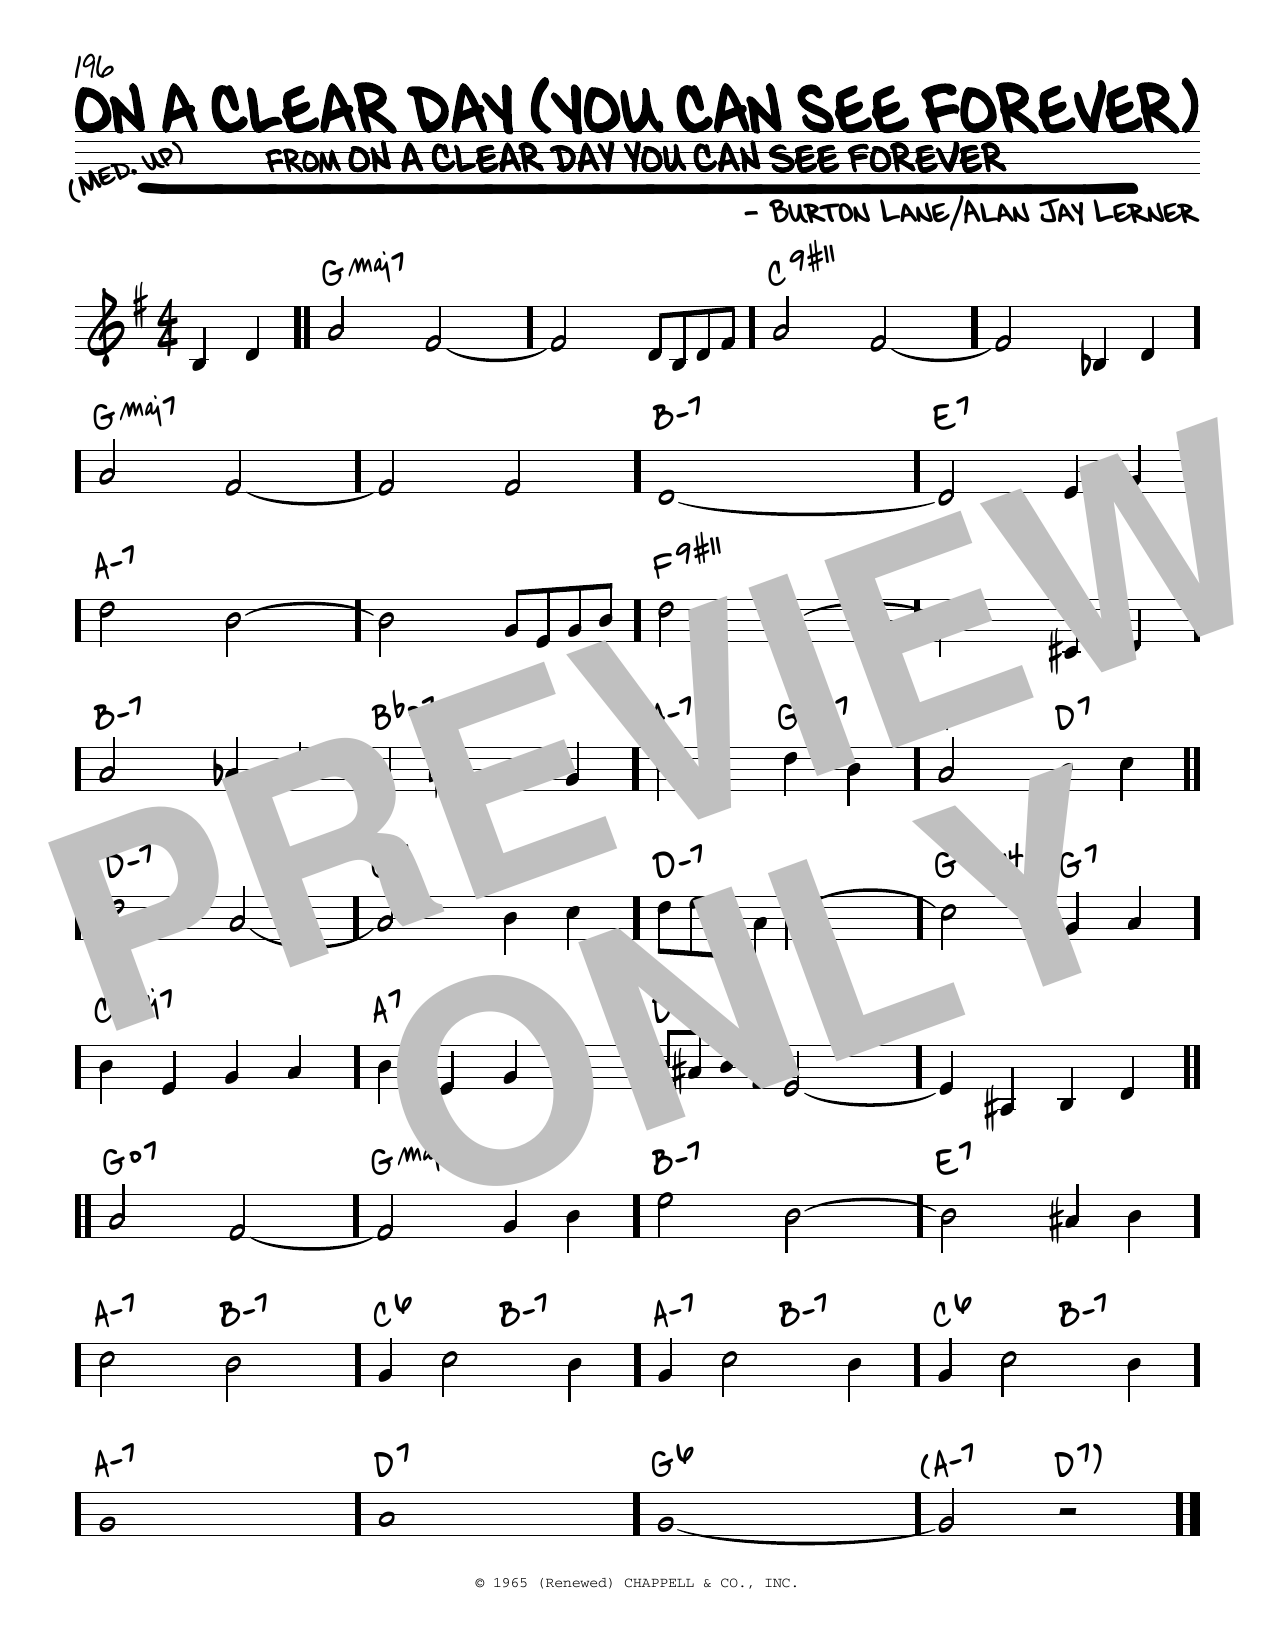 Download Burton Lane On A Clear Day (You Can See Forever) Sheet Music